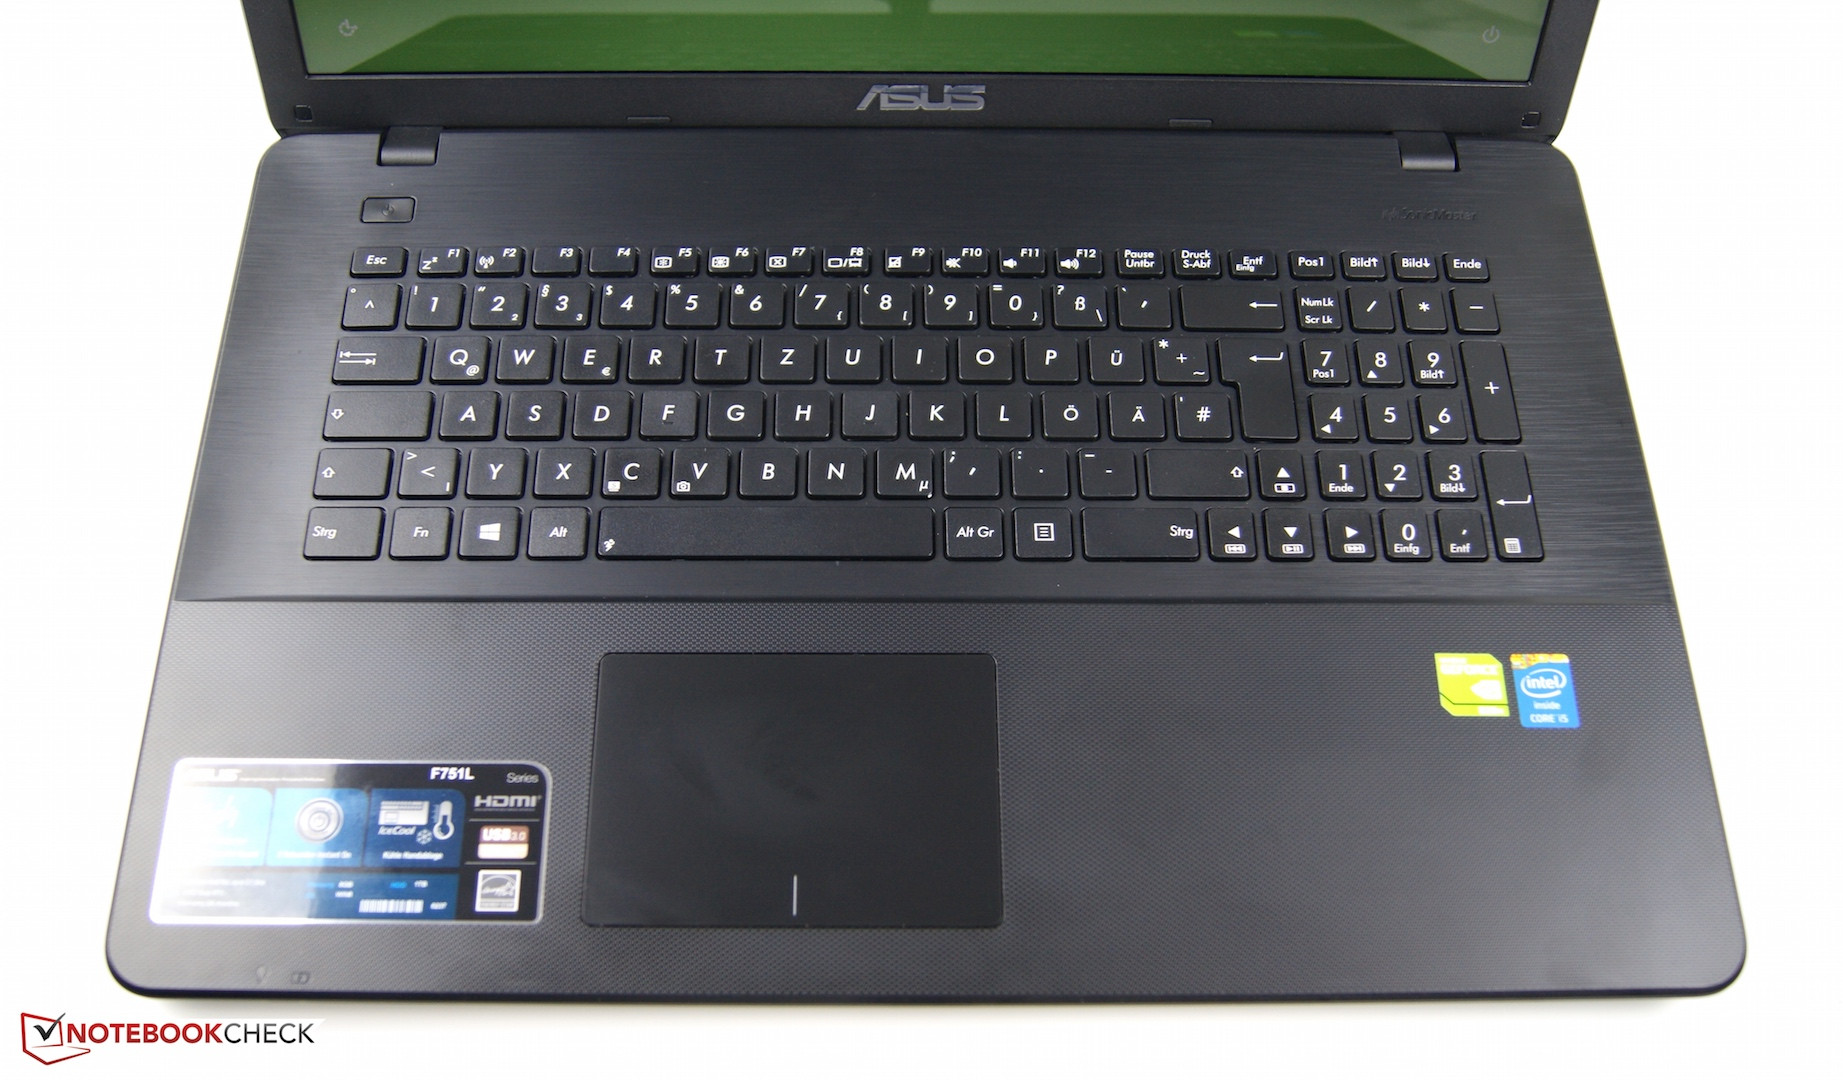 The input devices of Asus' laptop. 